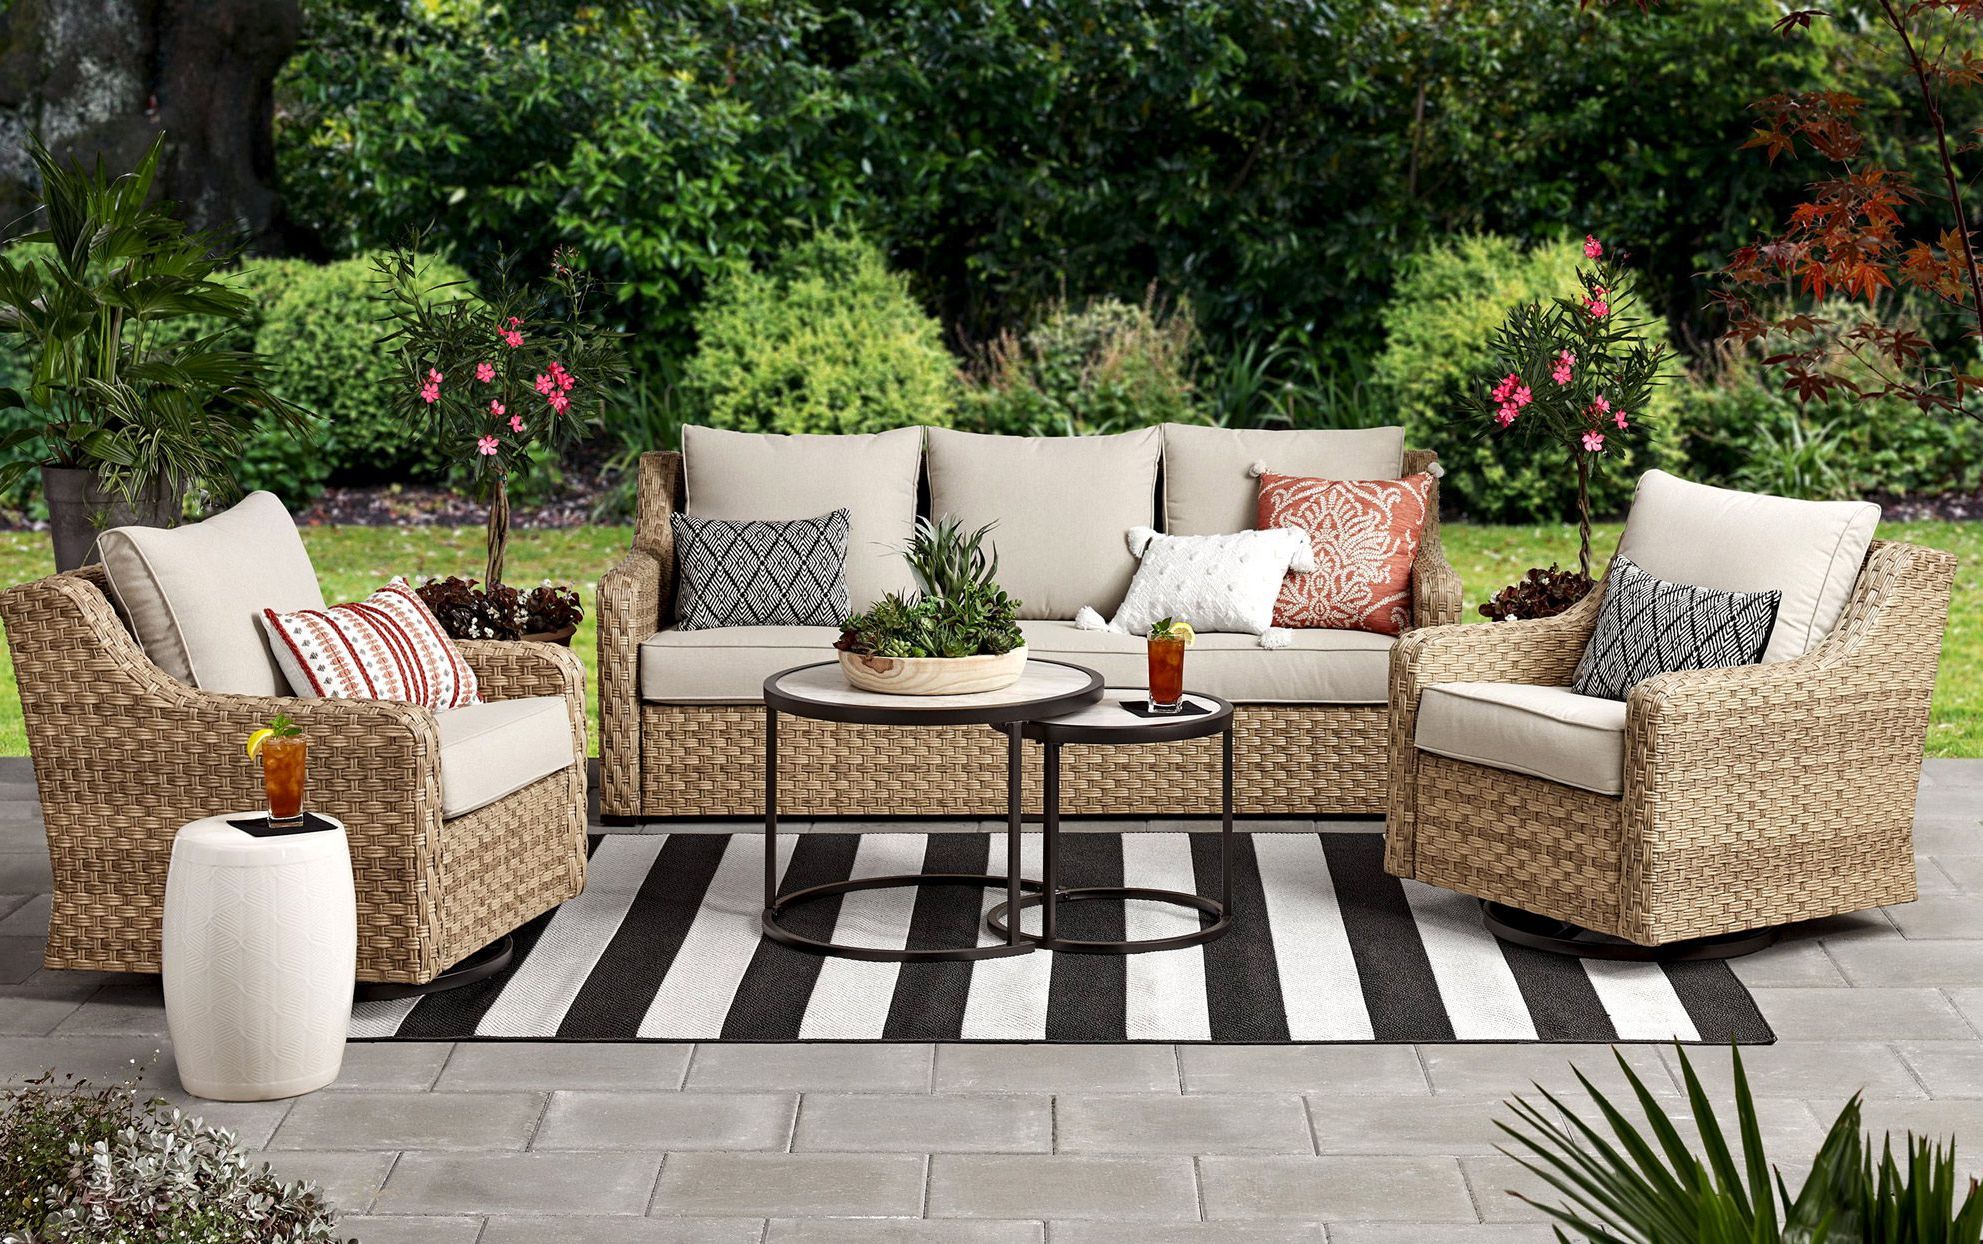 2 Piece Swivel Gliders With Patio Cover Throughout Latest This Stylish Wicker Patio Set Keeps Selling Out—here's Why We Love It (View 11 of 15)